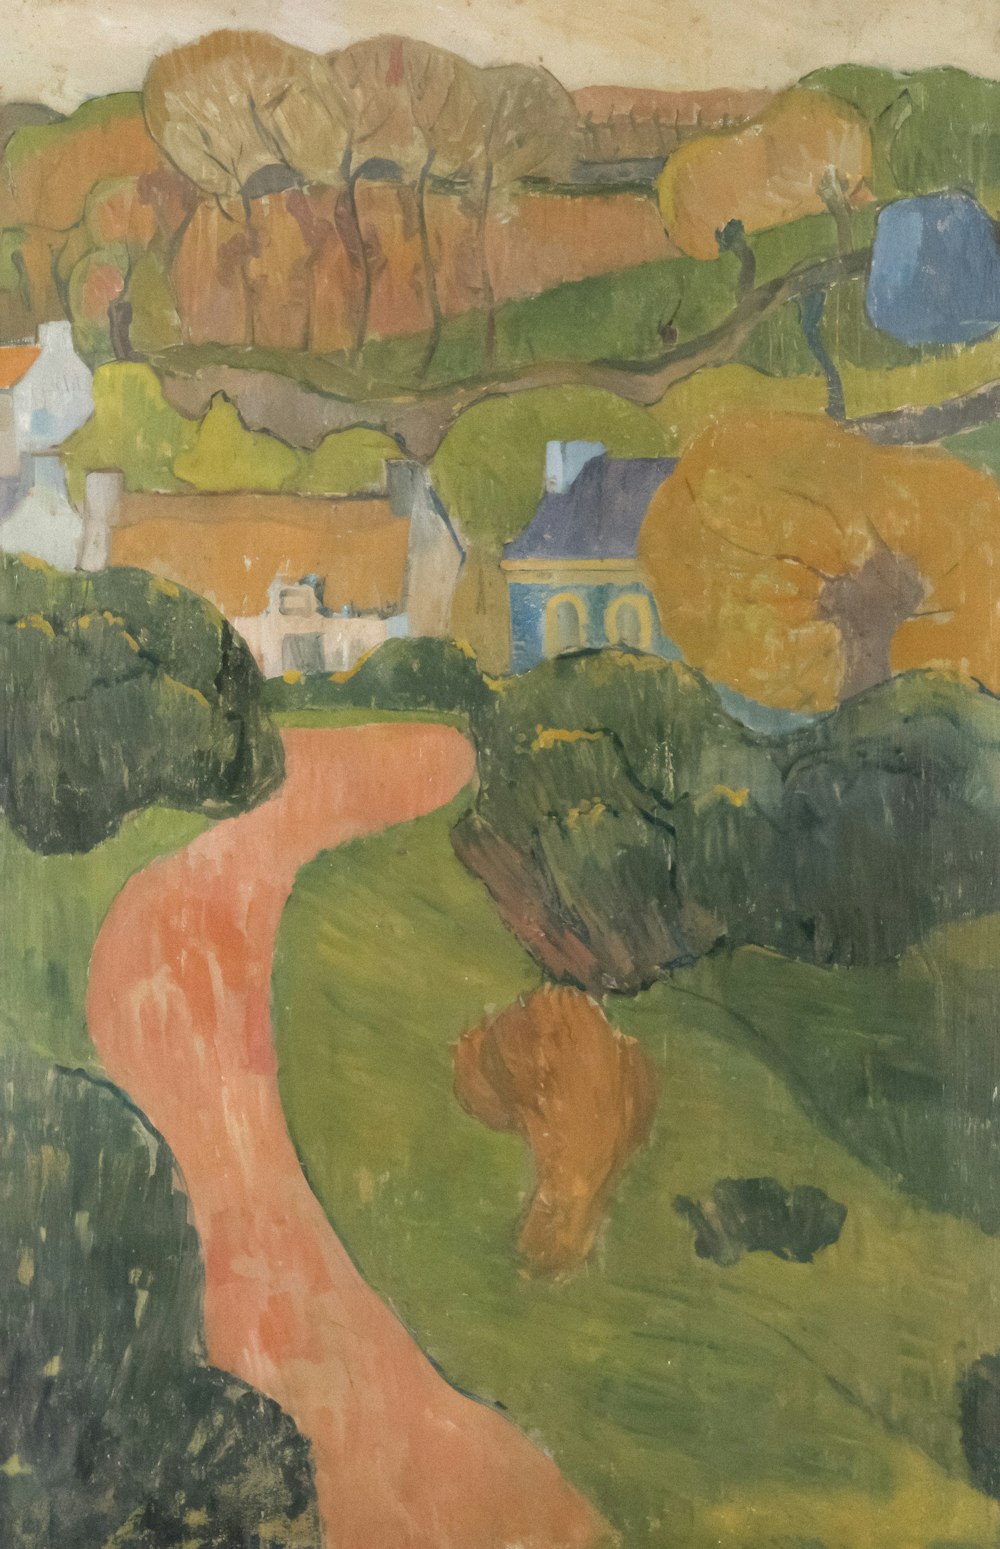 a painting of a rural landscape with houses and trees